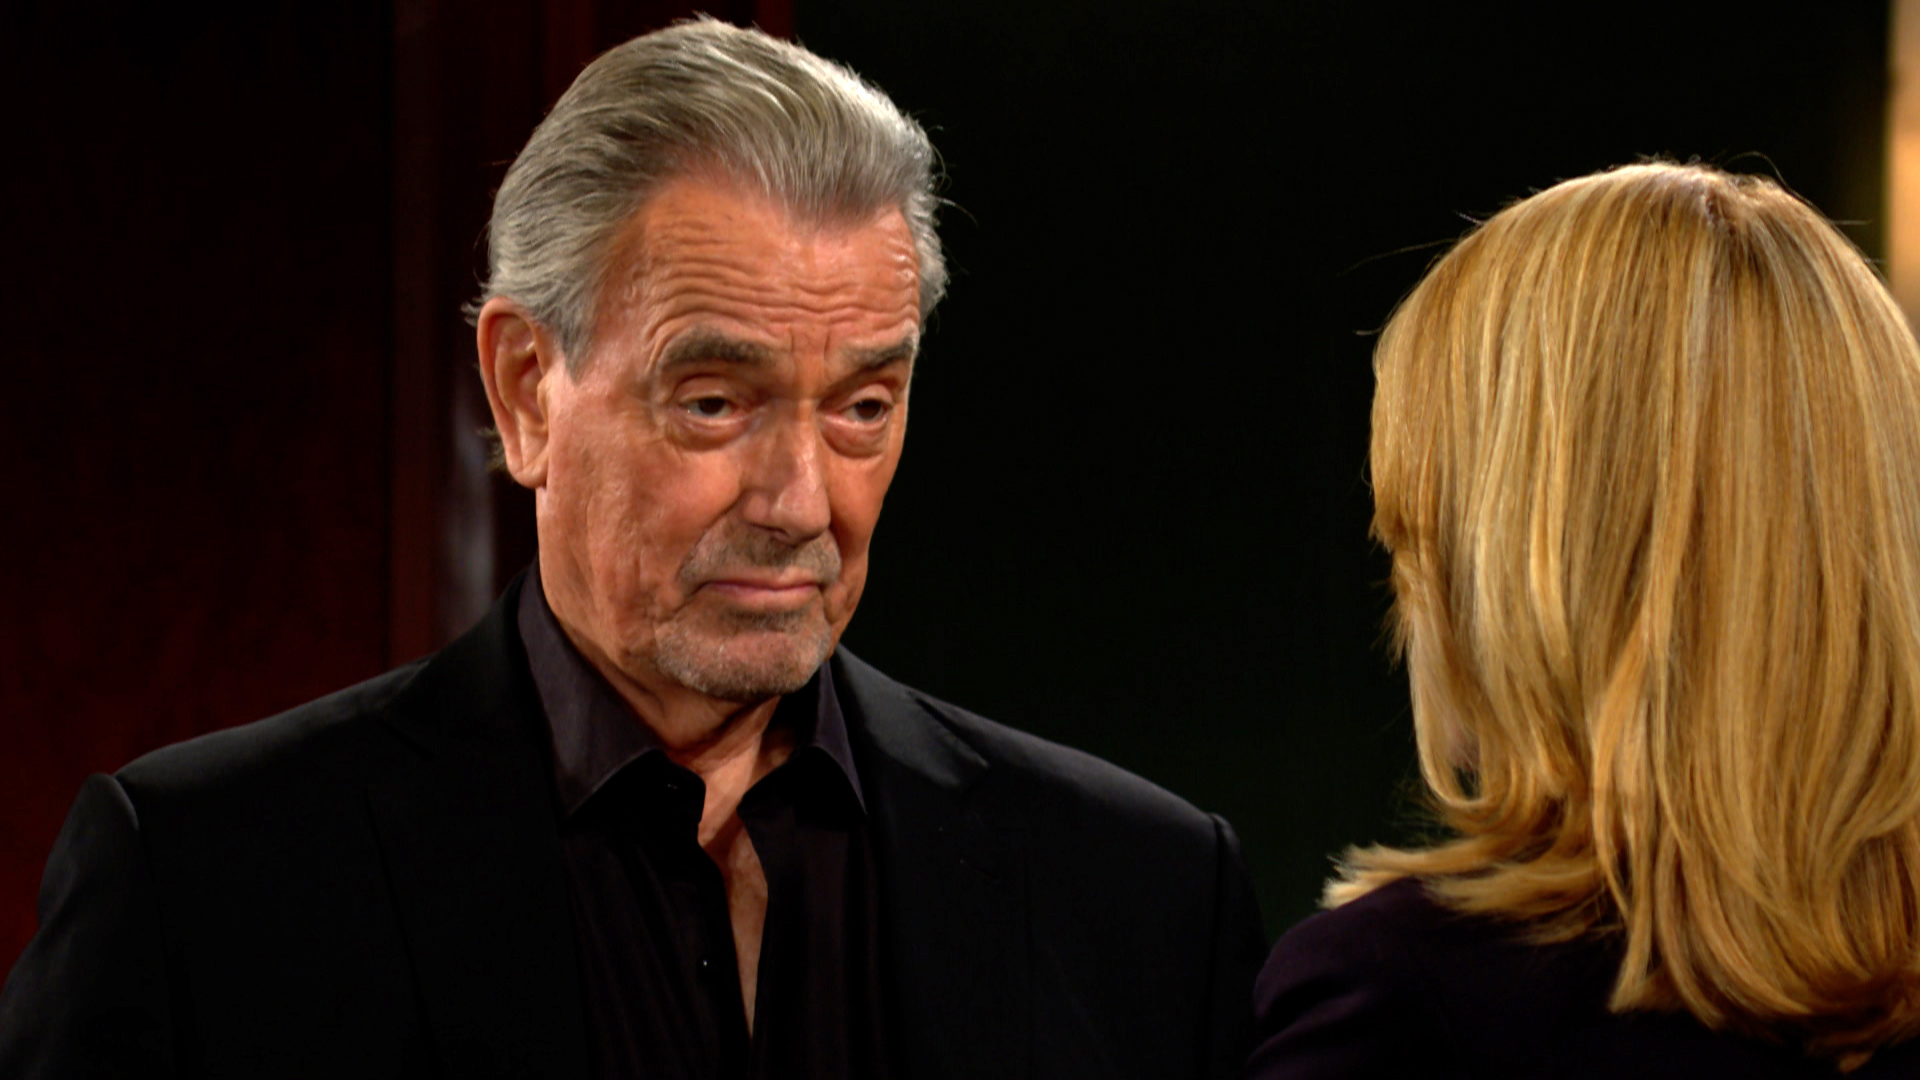 The Young and the Restless spoiler: Victor's plan backfires? | What to Watch